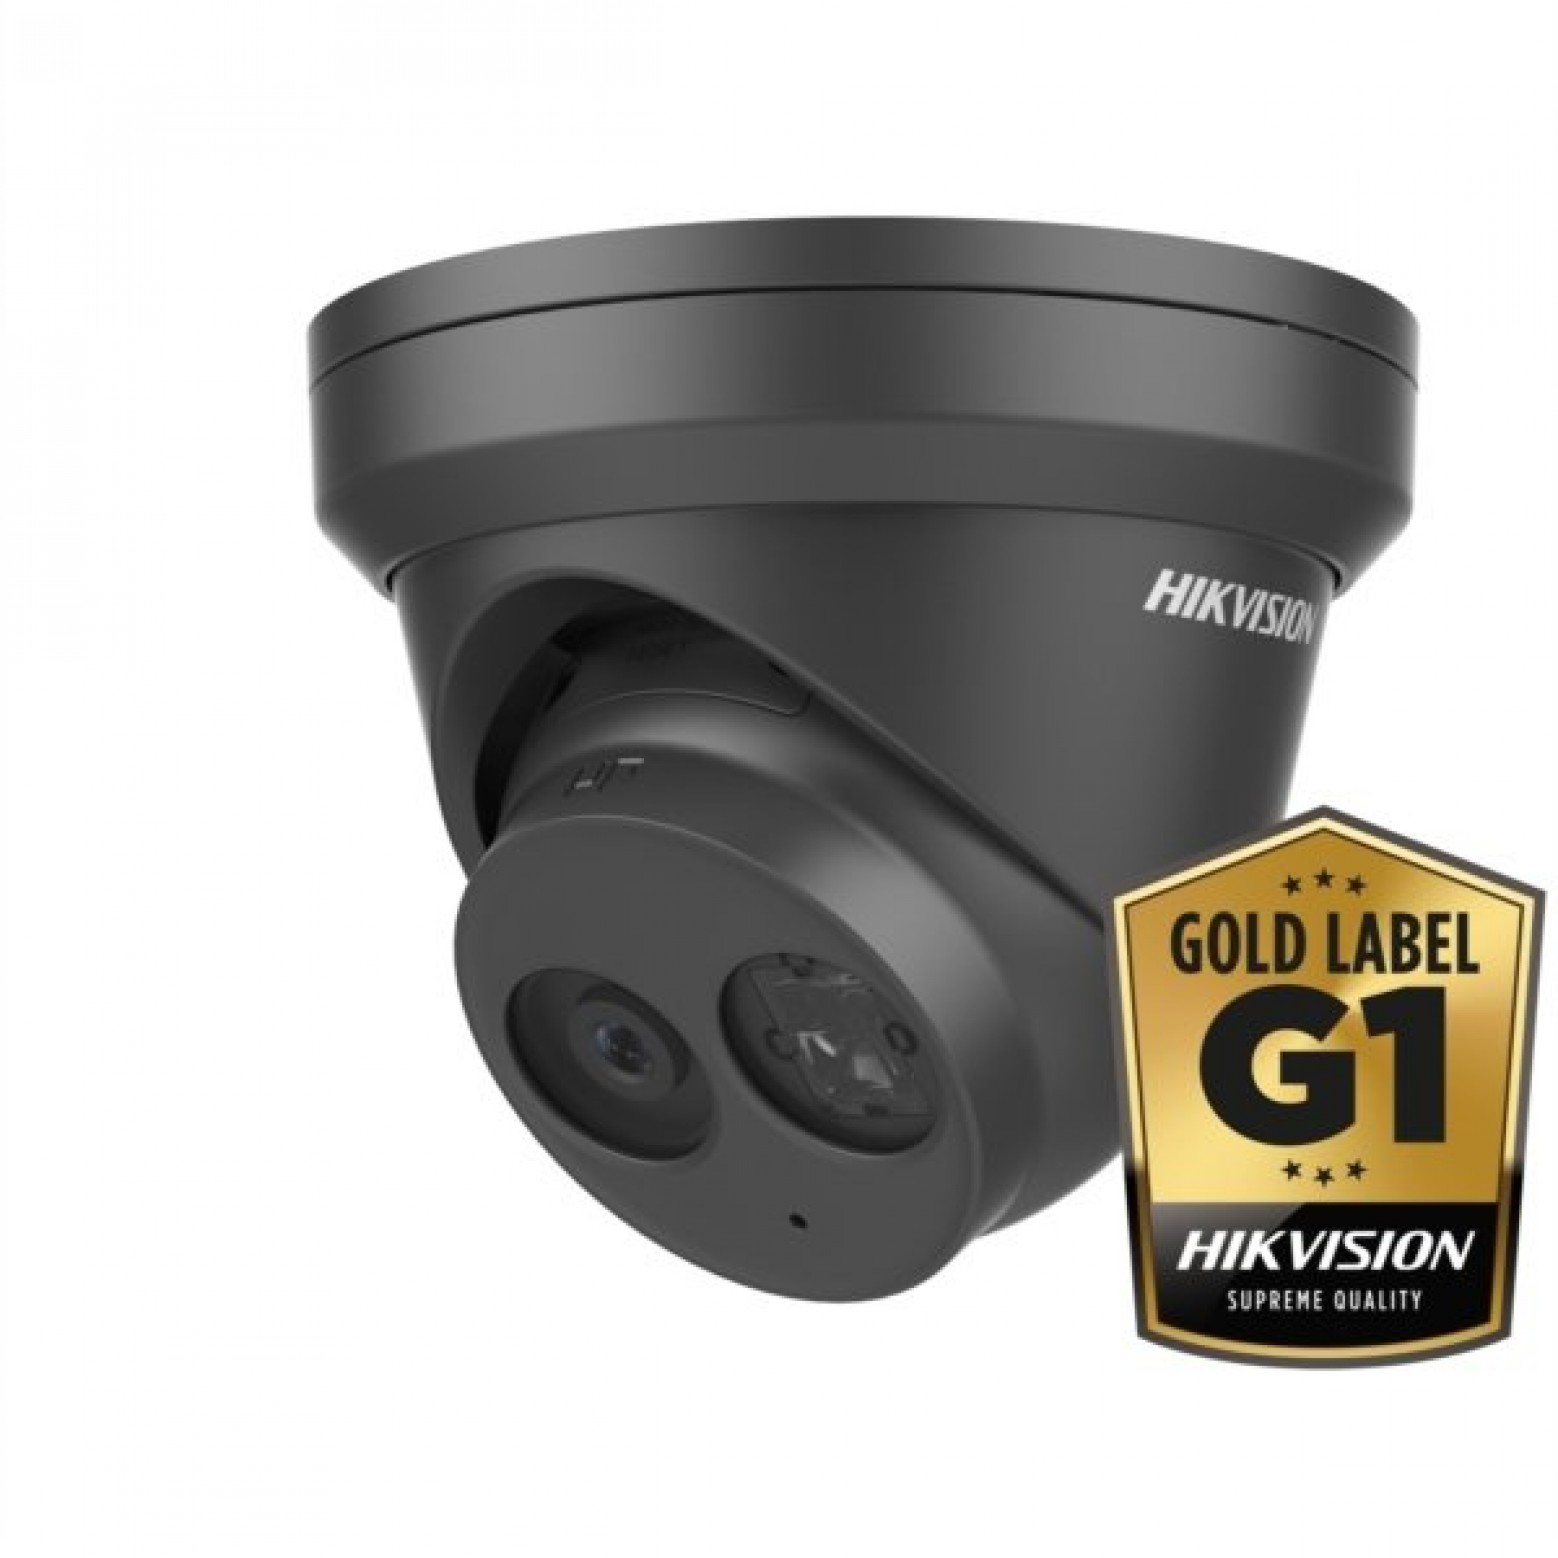 Hikvision DS-2CD2355FWD-IB, Exir Dome Camera, Black Edition, 5MP, 30m IR, WDR, Ultra Low Light